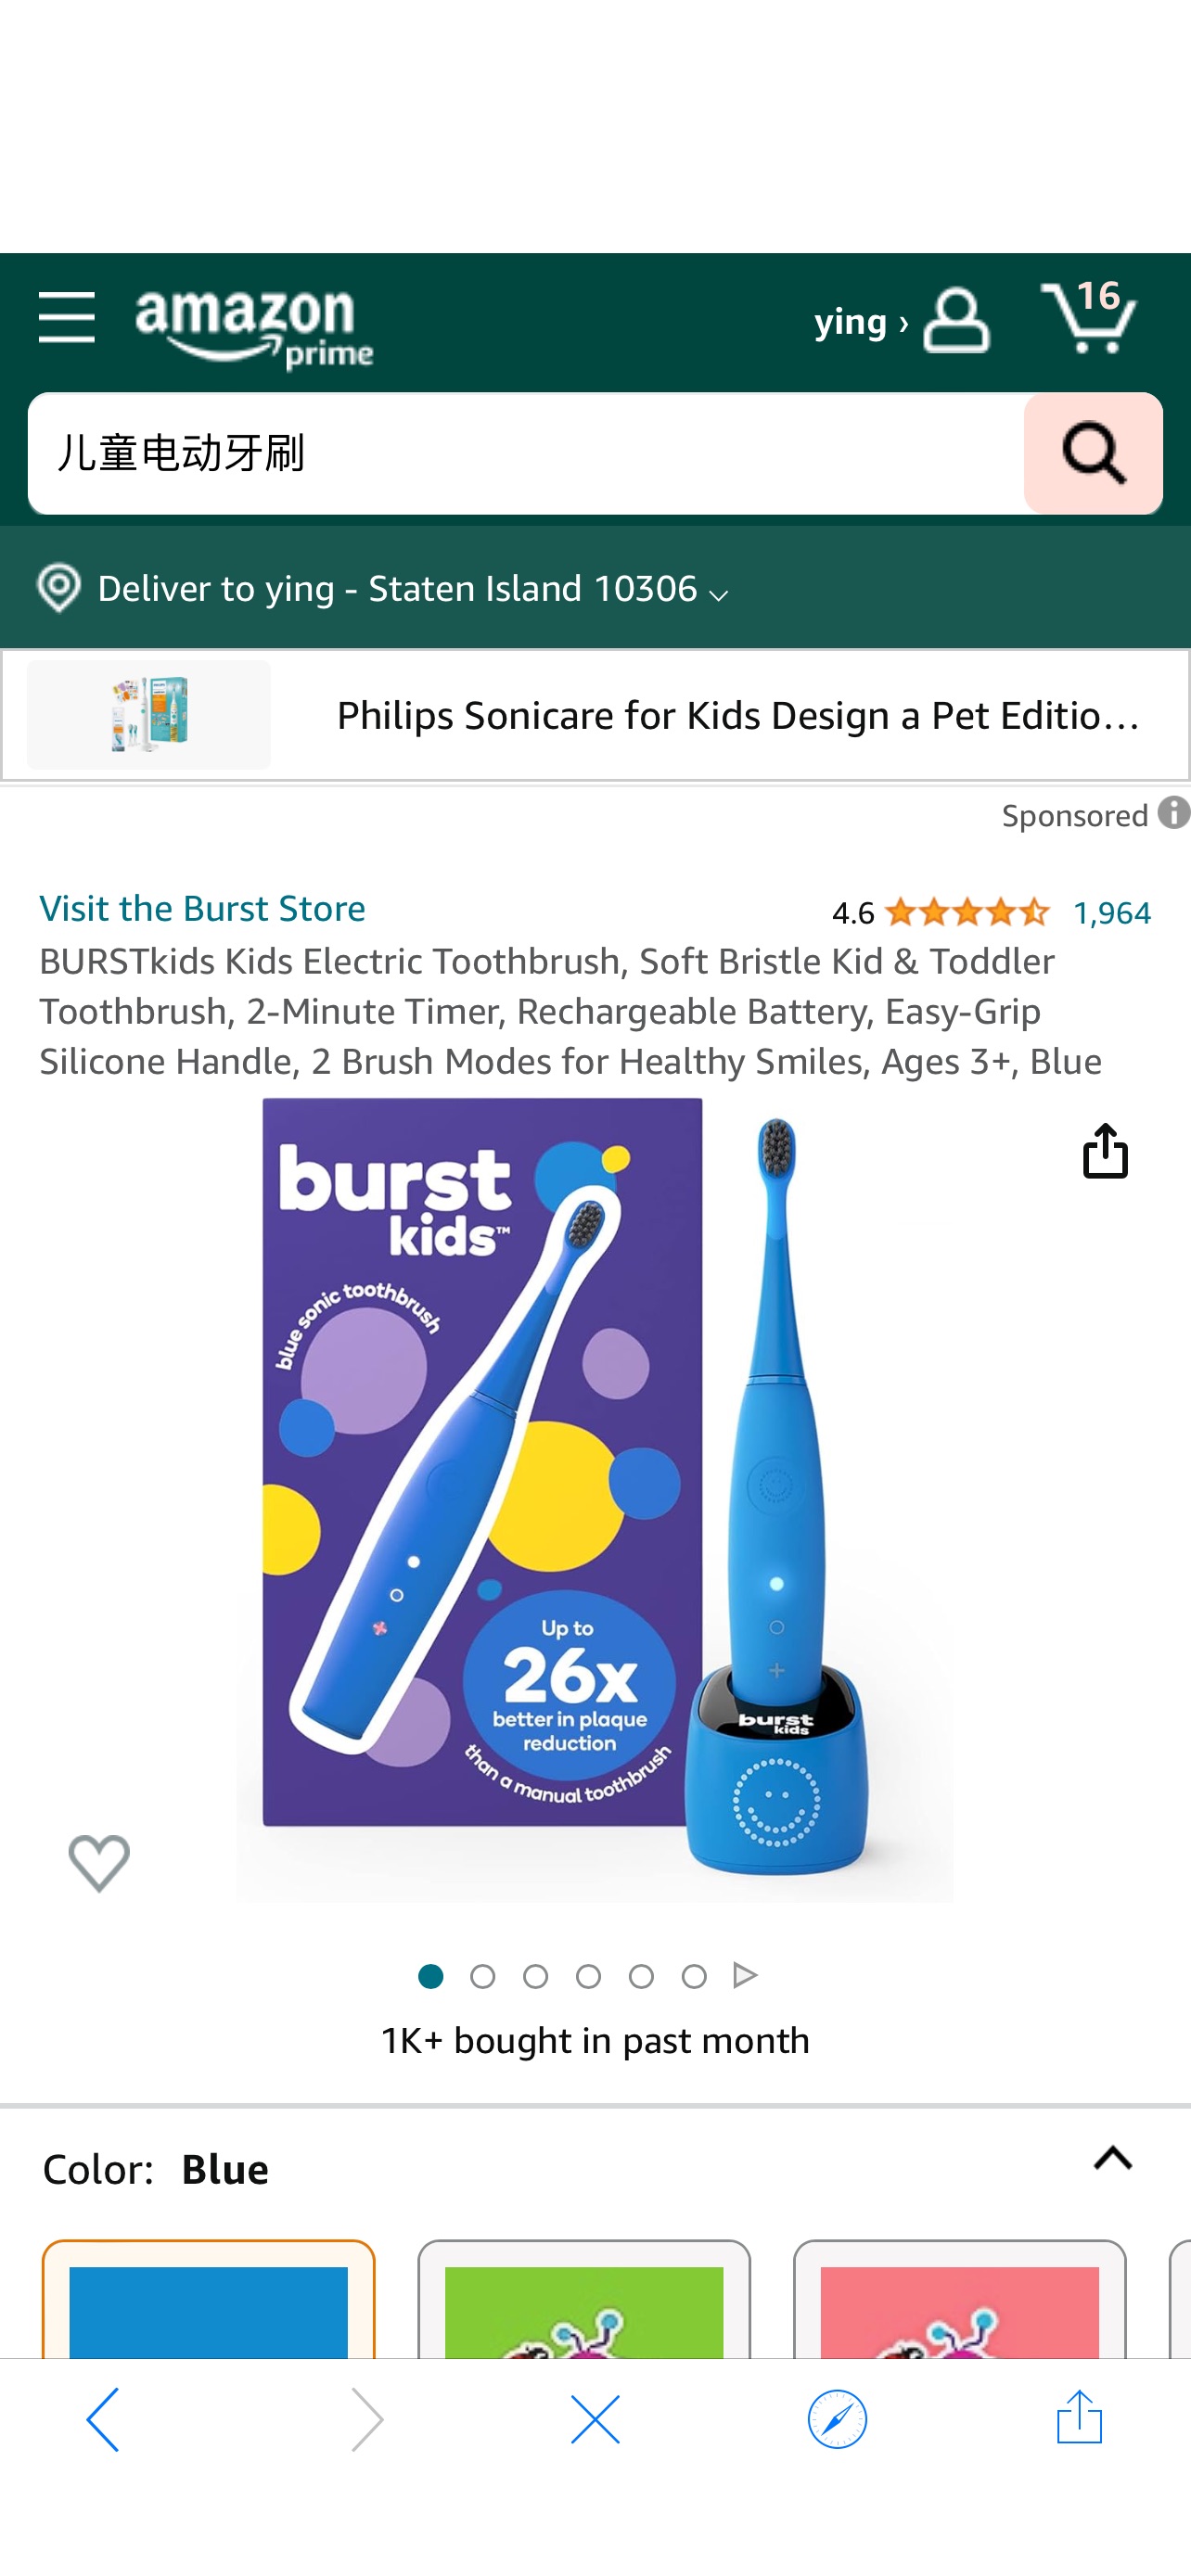 Amazon.com : BURSTkids Kids Electric Toothbrush, Soft Bristle Kid & Toddler Toothbrush, 2-Minute Timer, Rechargeable Battery, Easy-Grip Silicone Handle, 2 Brush Modes for Healthy Smiles, Ages 3+, Blue